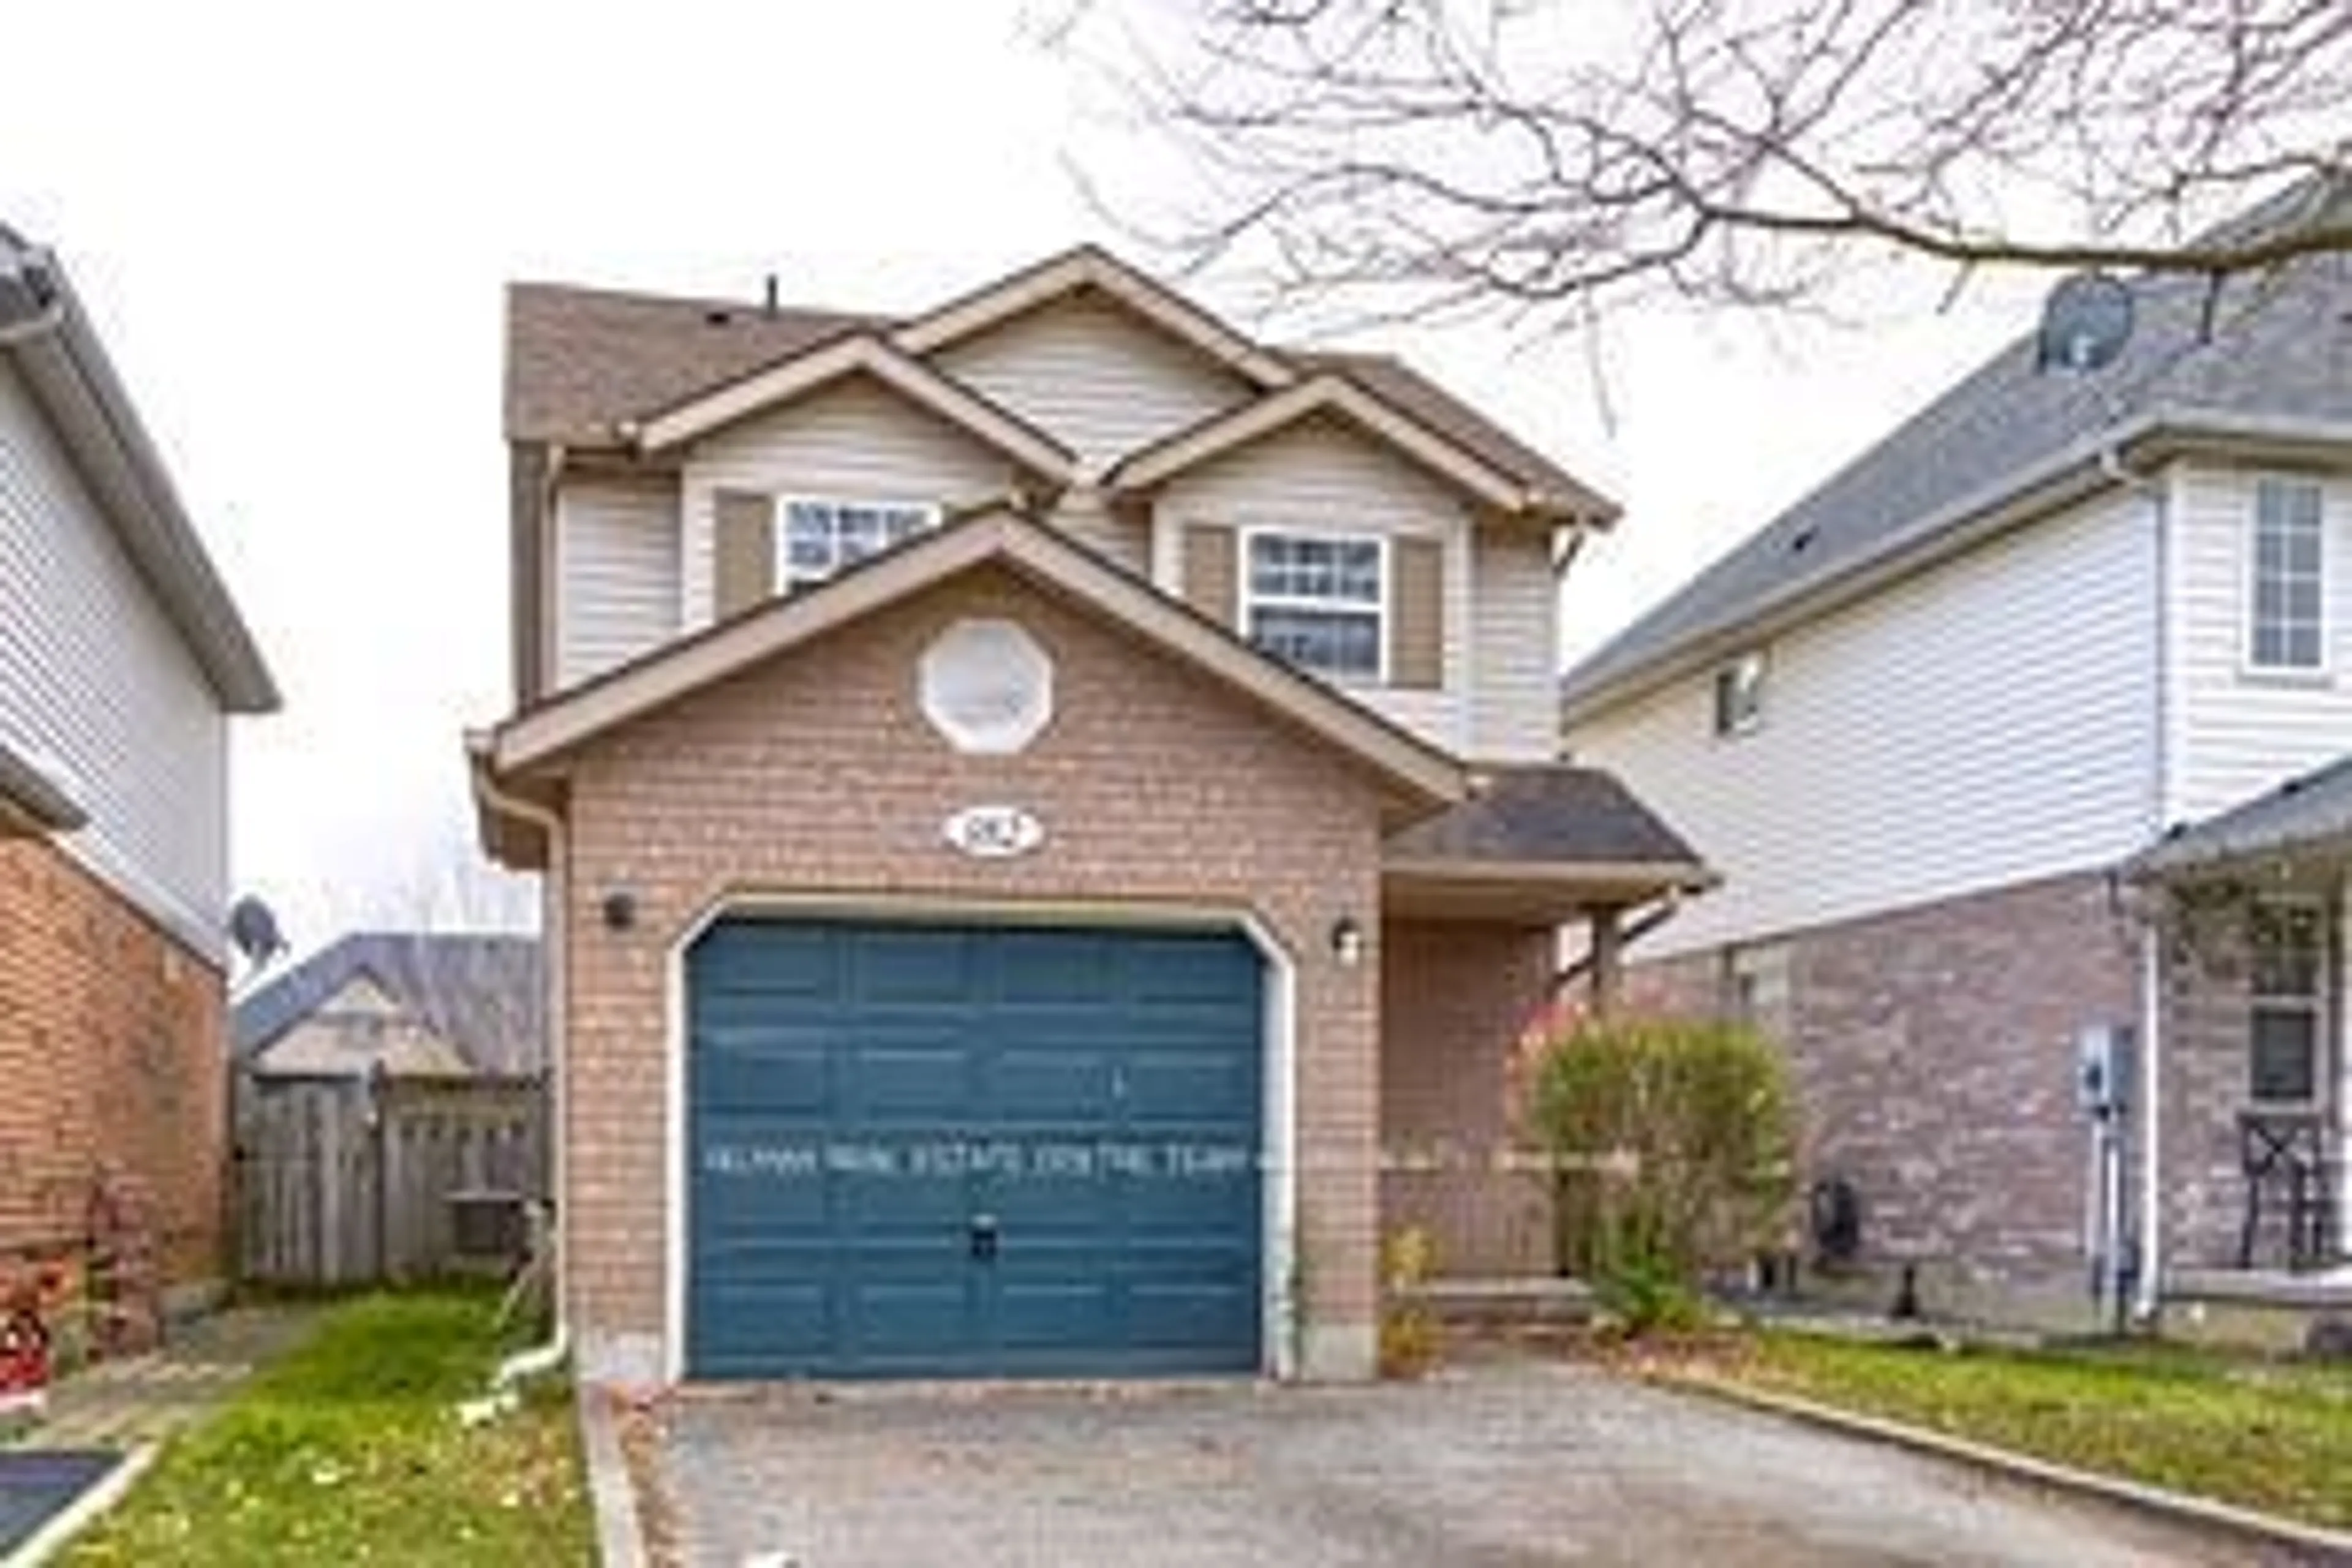 Home with unknown exterior material for 182 Kovac Rd, Cambridge Ontario N1R 8K3